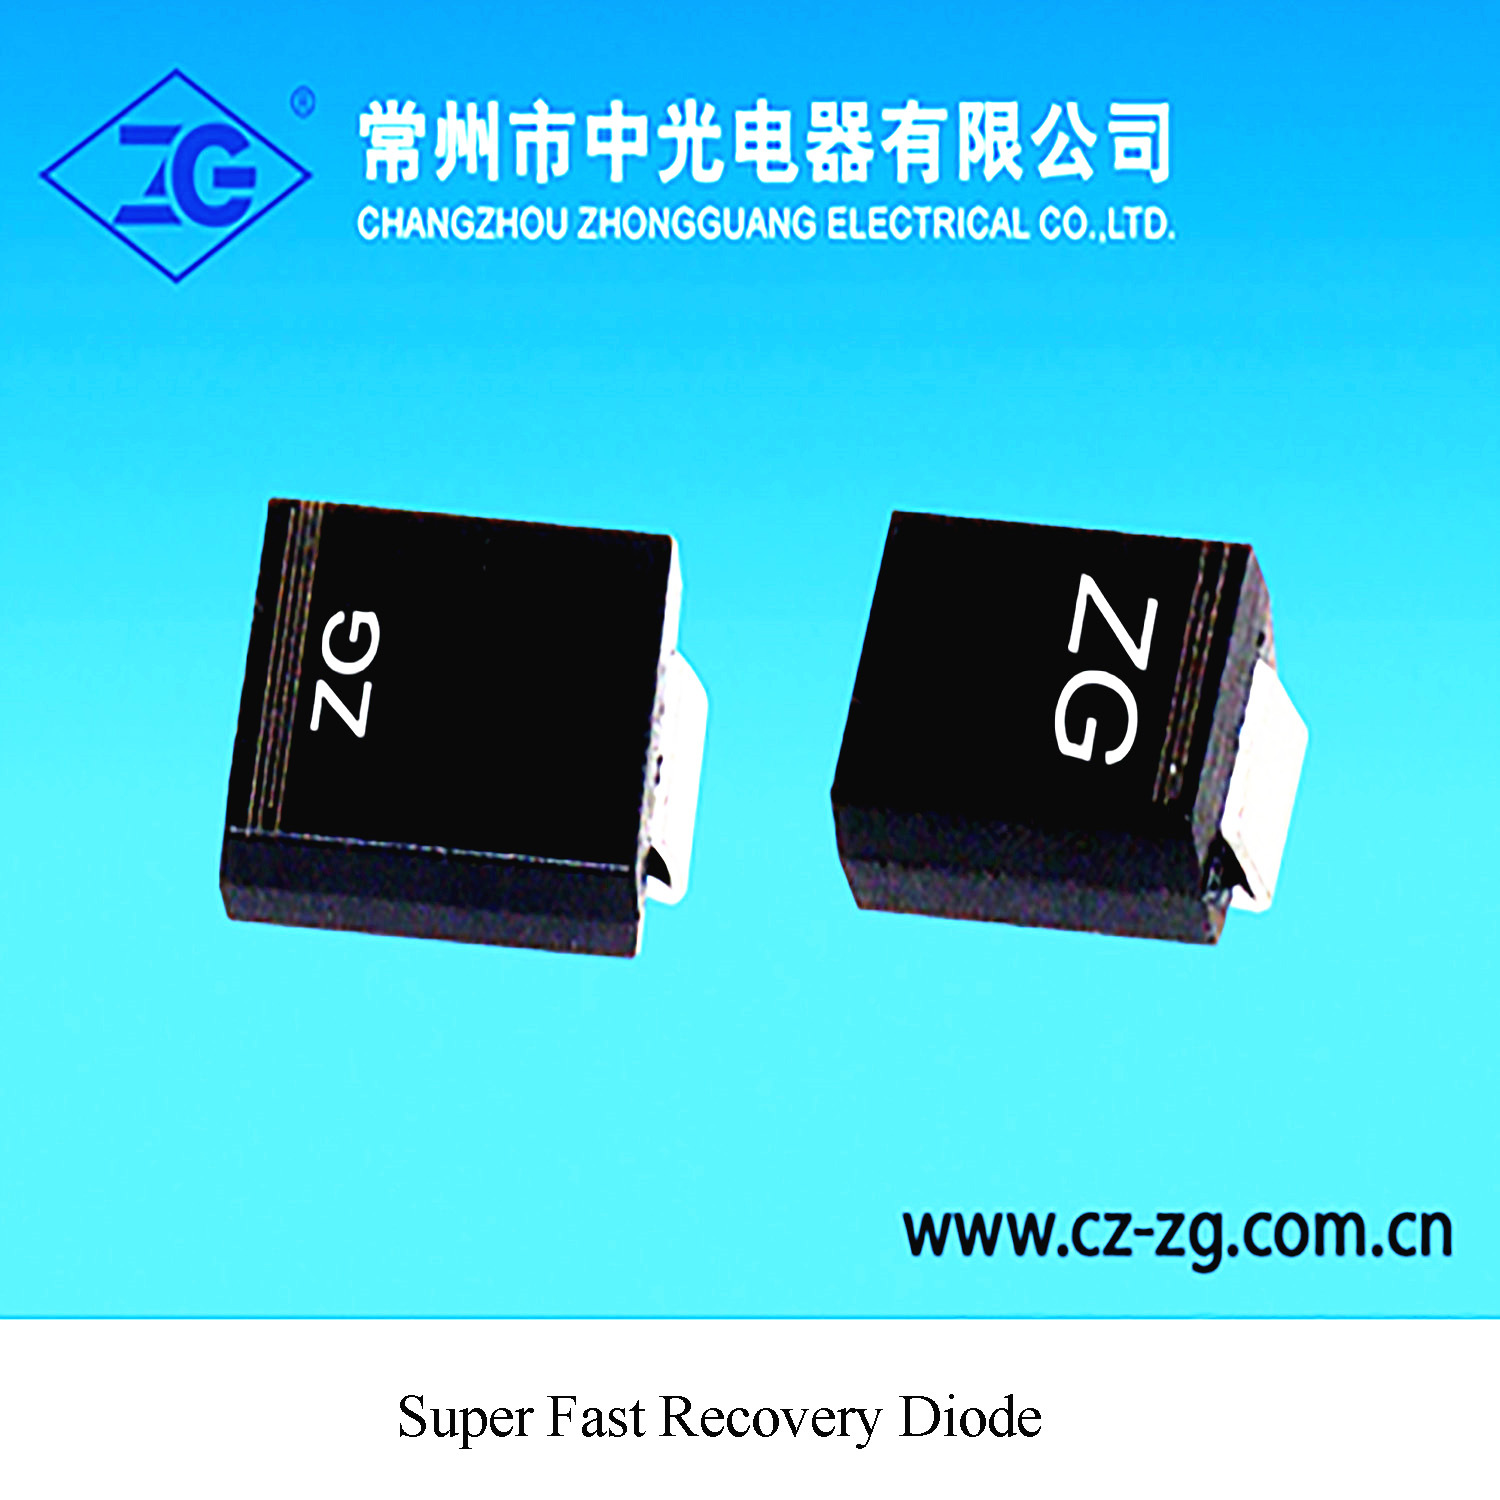 Super Fast Recovery Diode